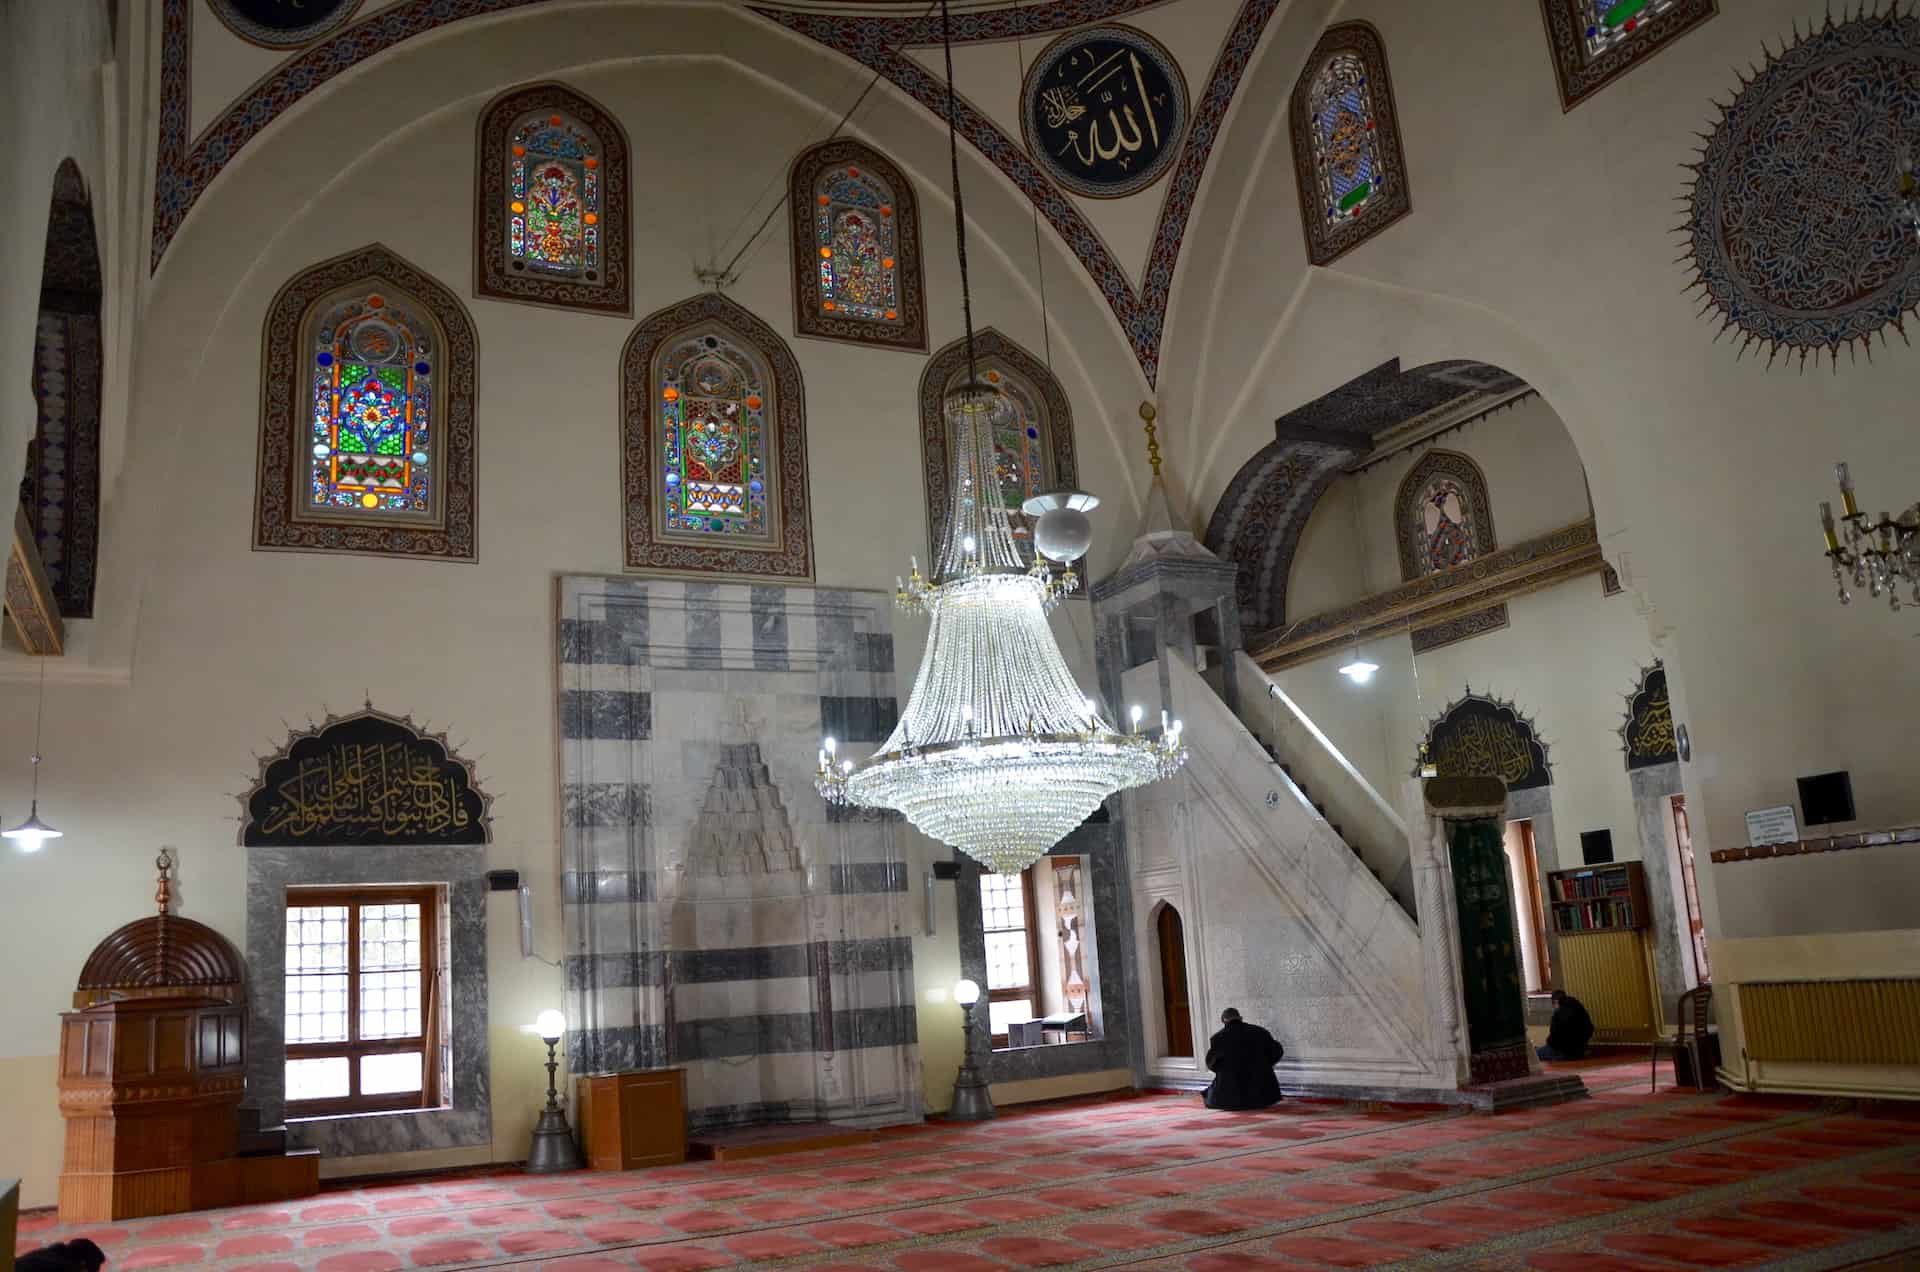 Prayer hall of the Imaret Mosque in Afyon, Turkey